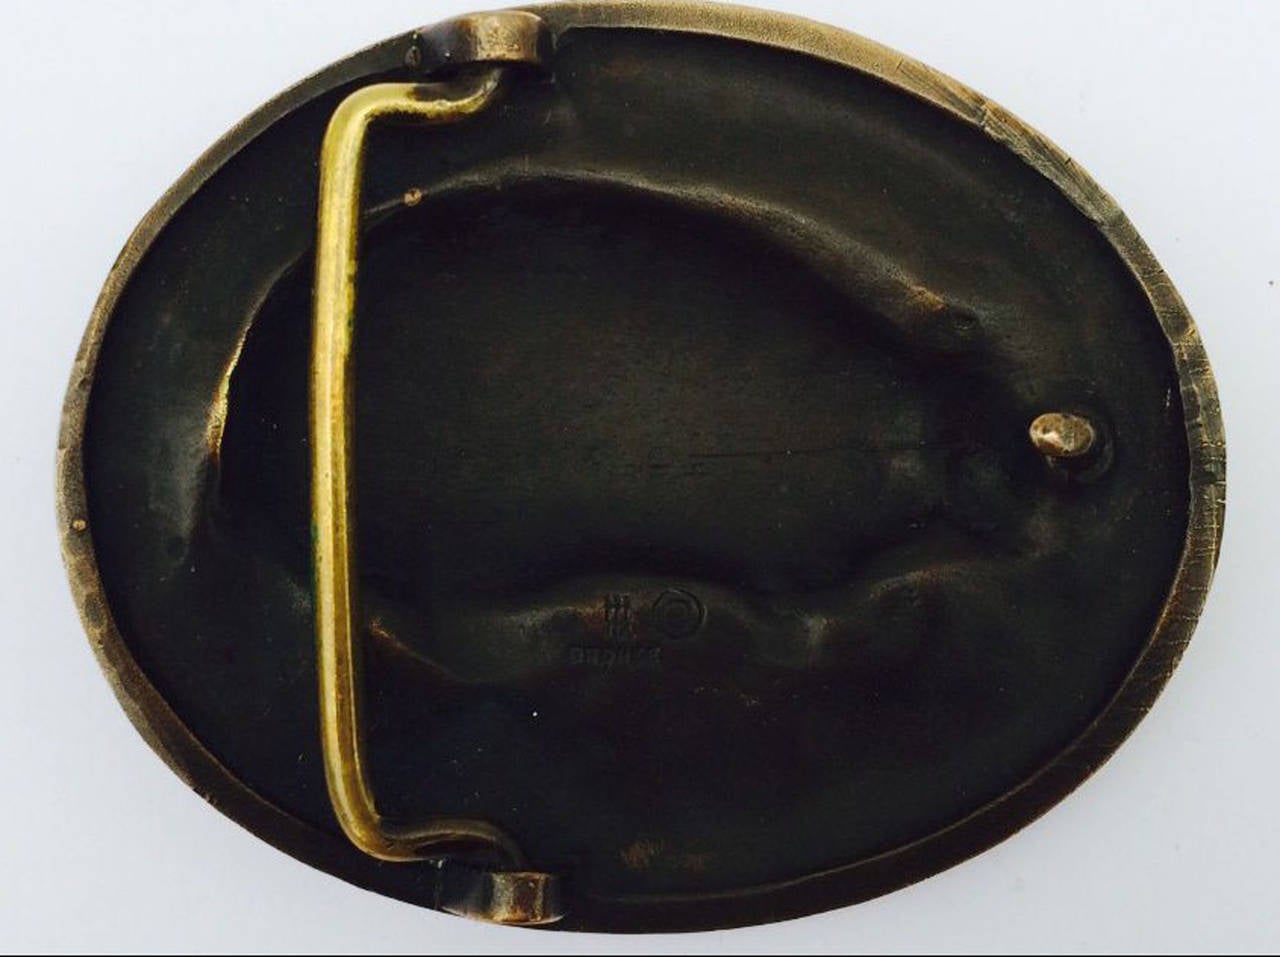 A fine and rare vintage James Avery bronze belt buckle. Large signed item displays outstanding design and execution. Buckle will fit any belt up to 1.75